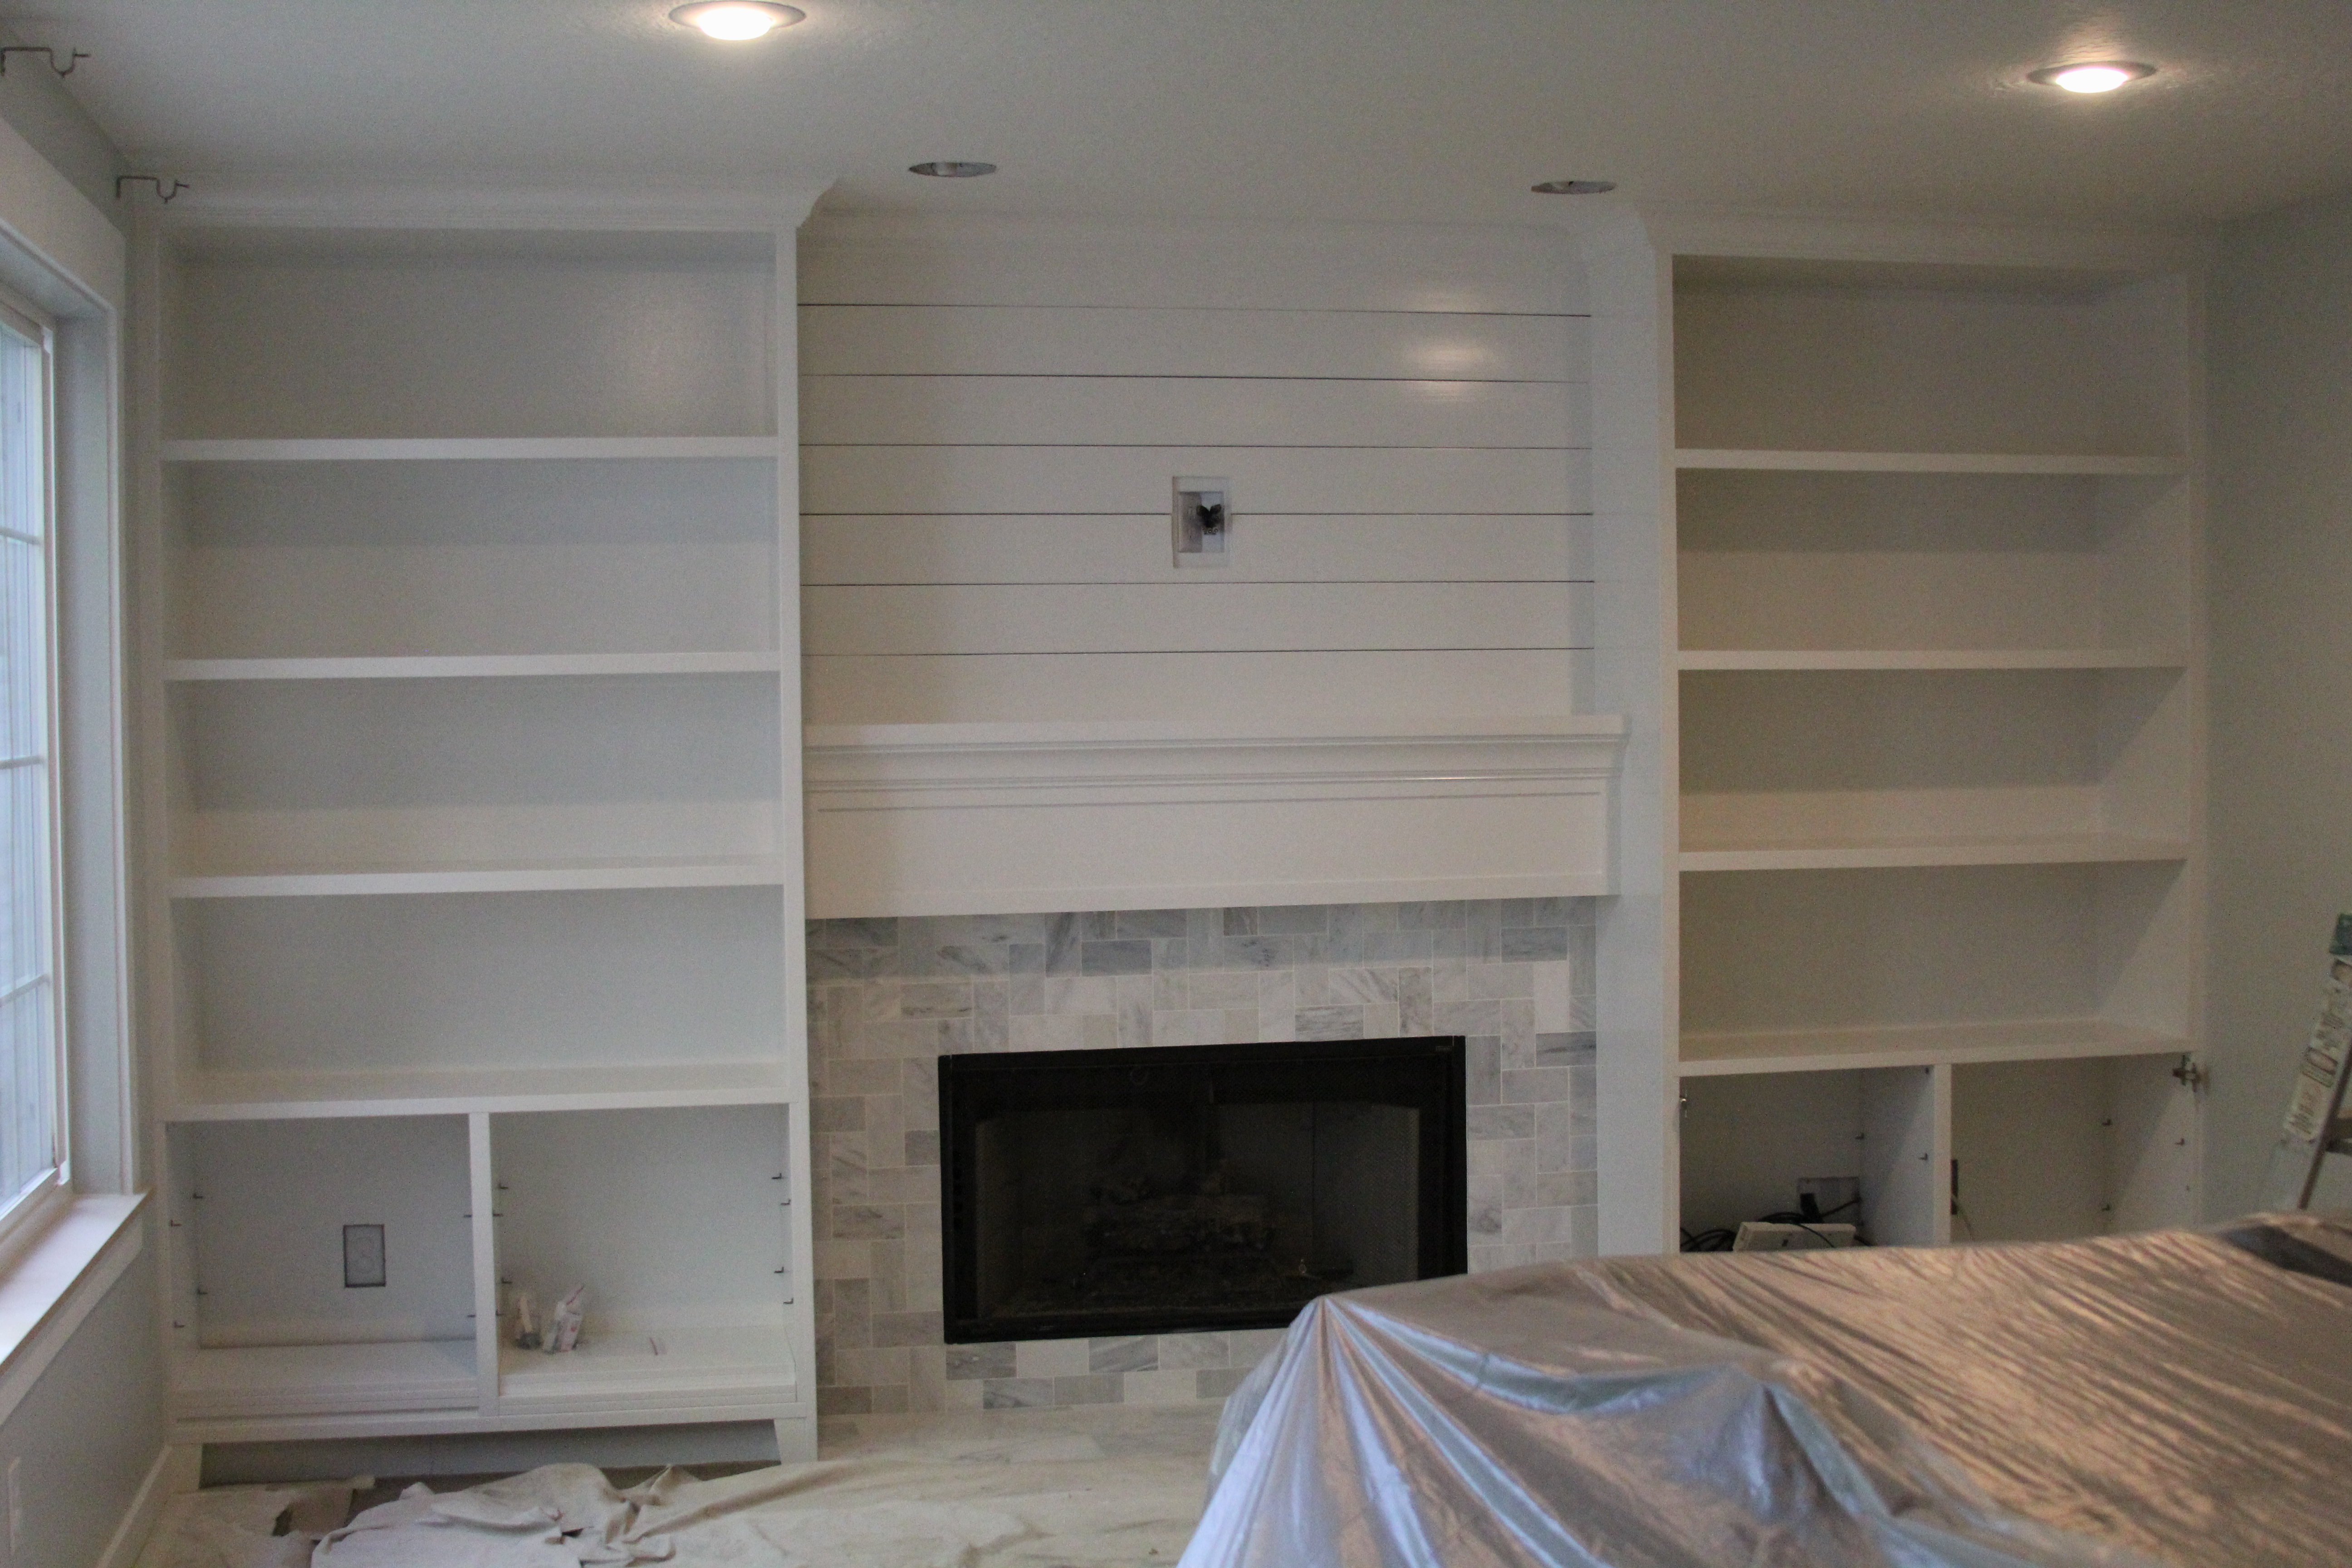 Diy Built Ins Part 2 Stagg Design, How To Build Cabinets Around Fireplace